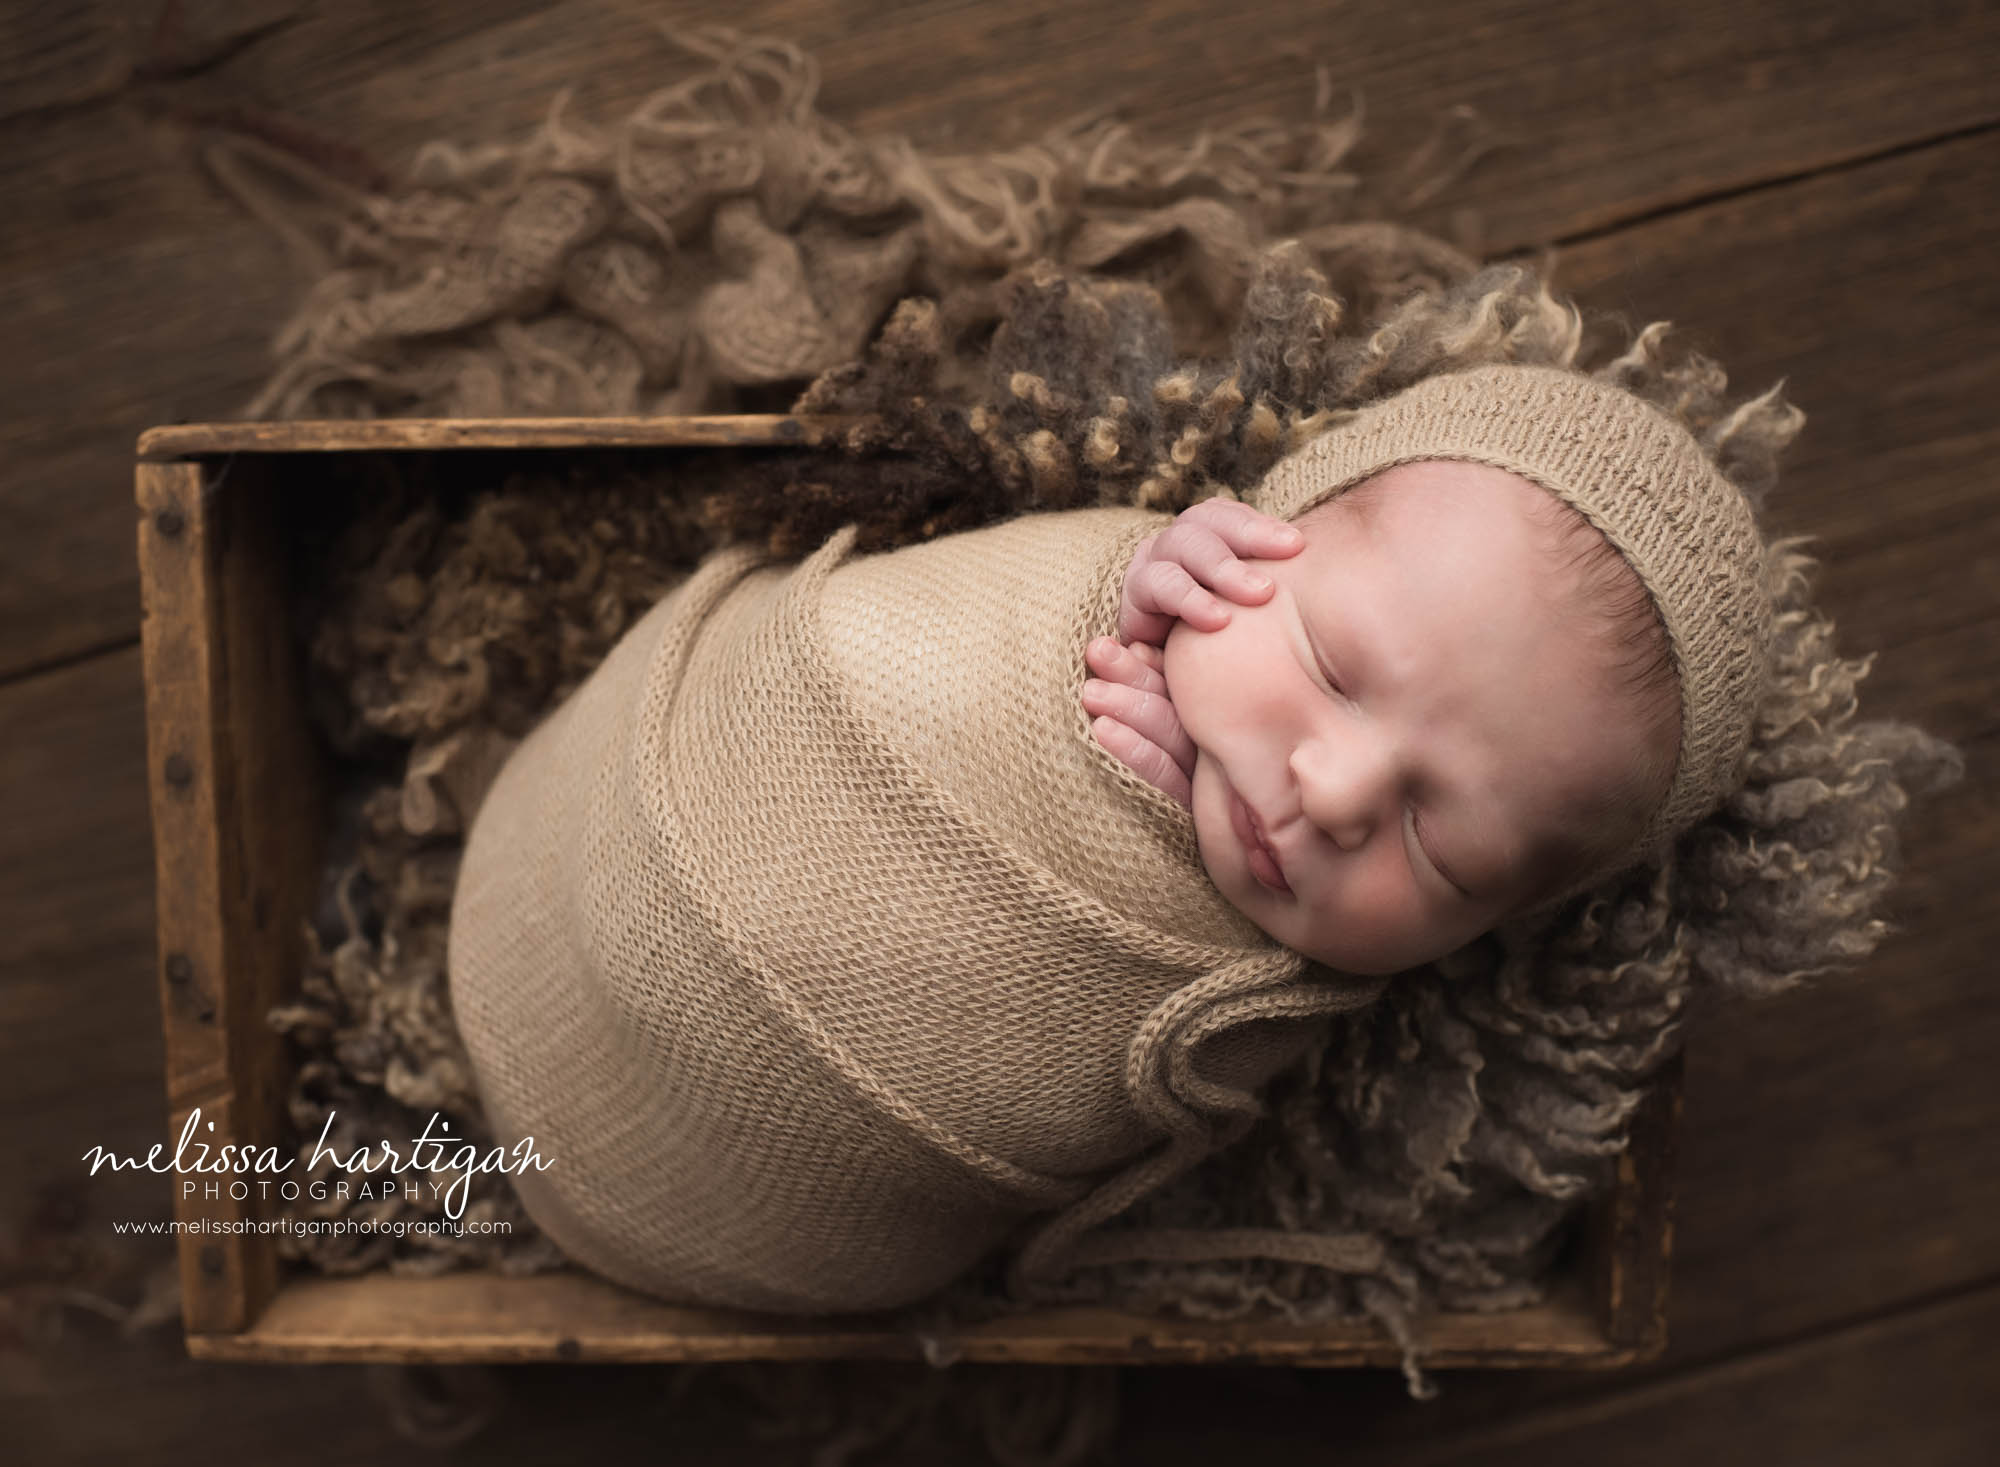 Melissa Hartigan Photography Newborn Photographer Connecticut baby boy sleeping in wooden crate wrapped in tan with matching kit hat